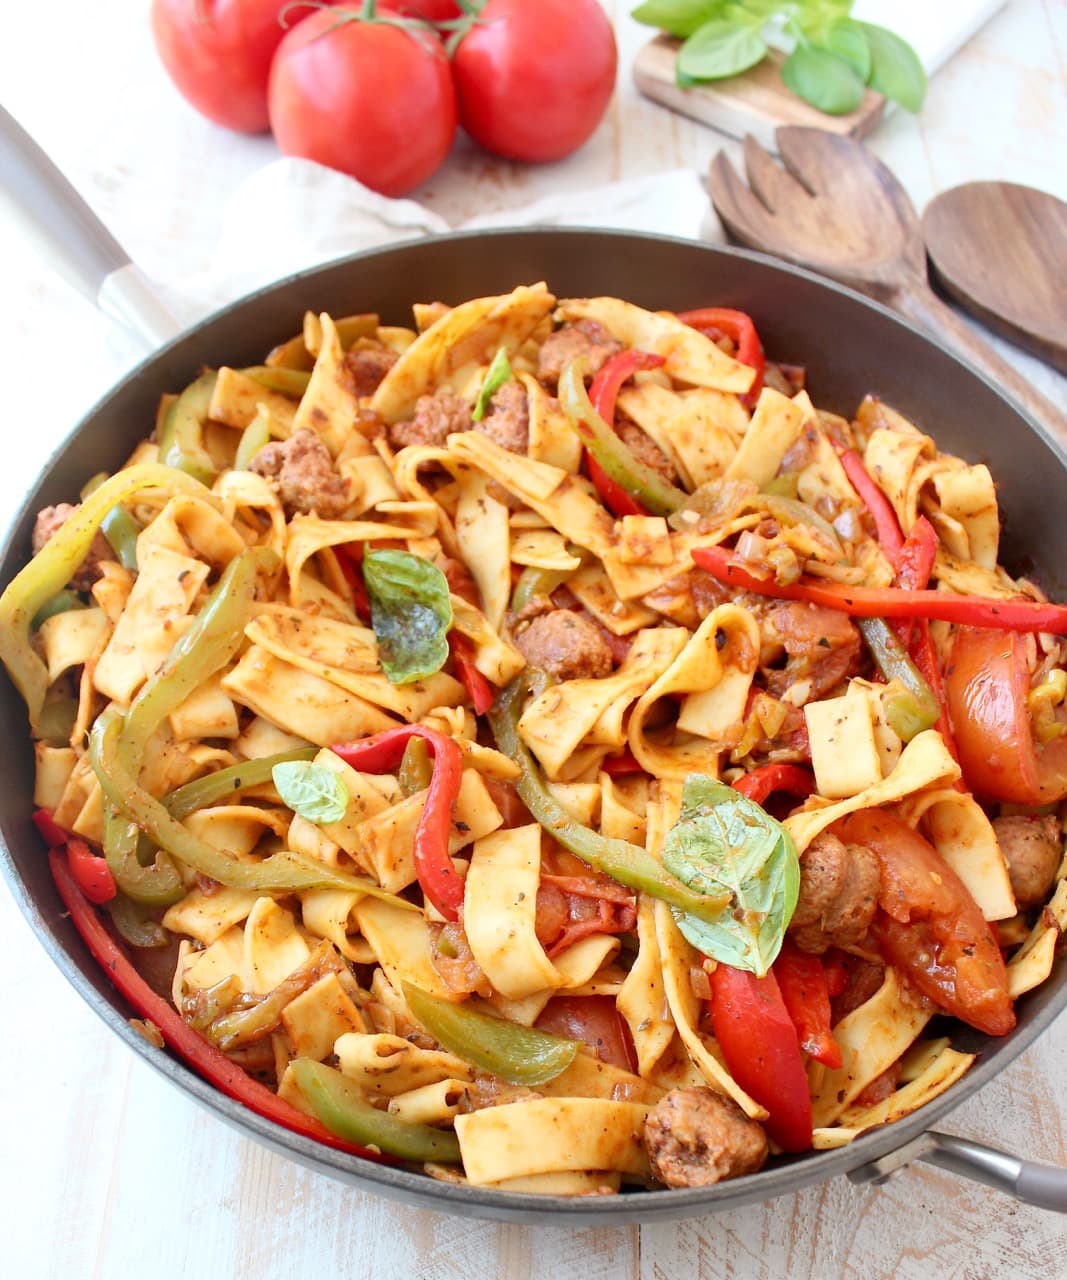 Italian Drunken Noodles with Peppers and Sausage